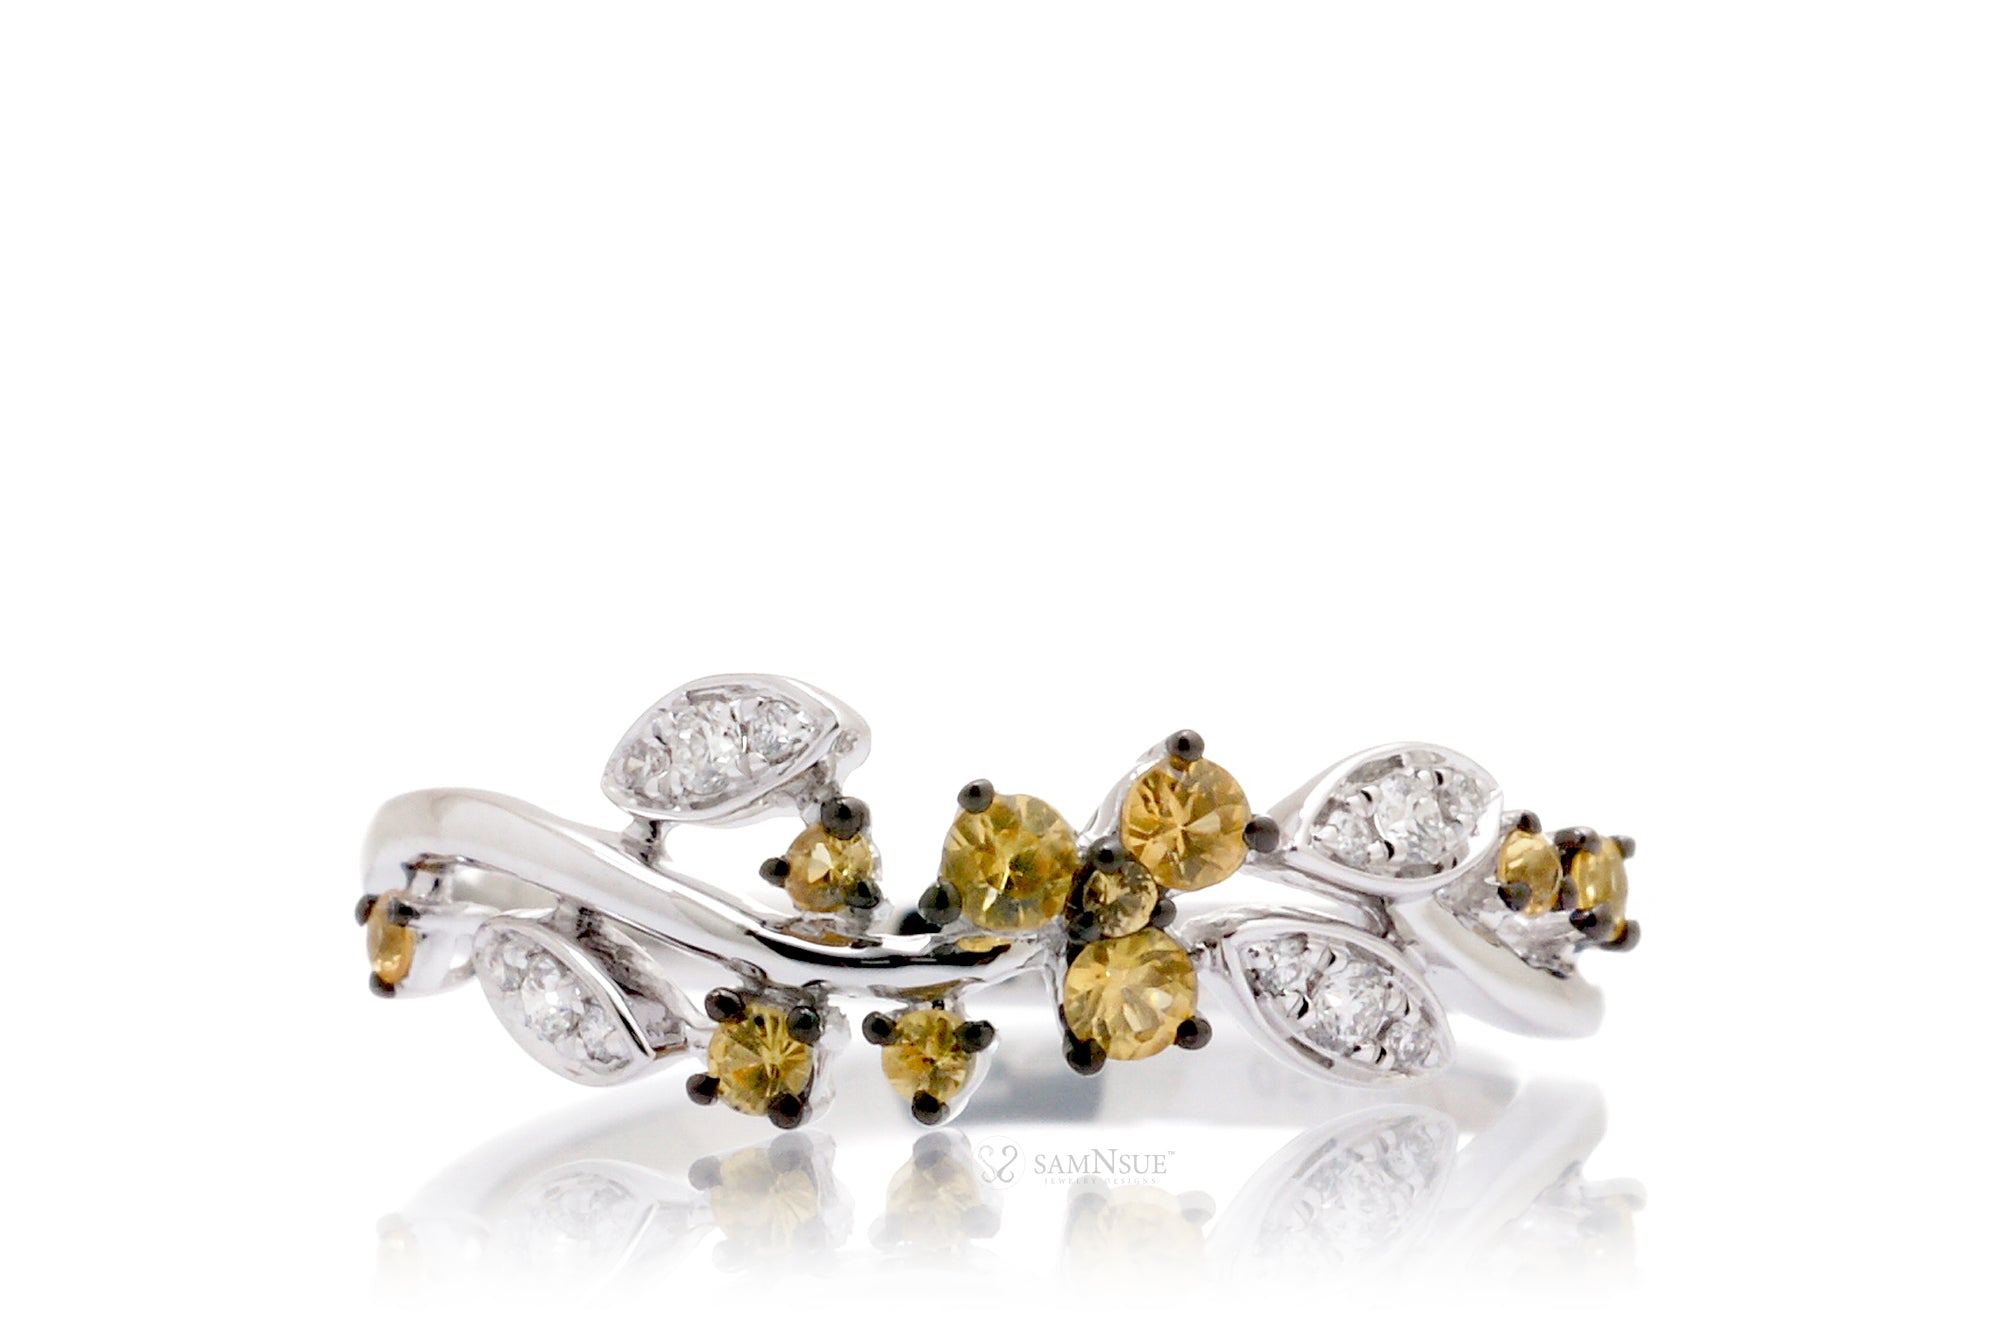 The Evy Yellow Sapphire Ring